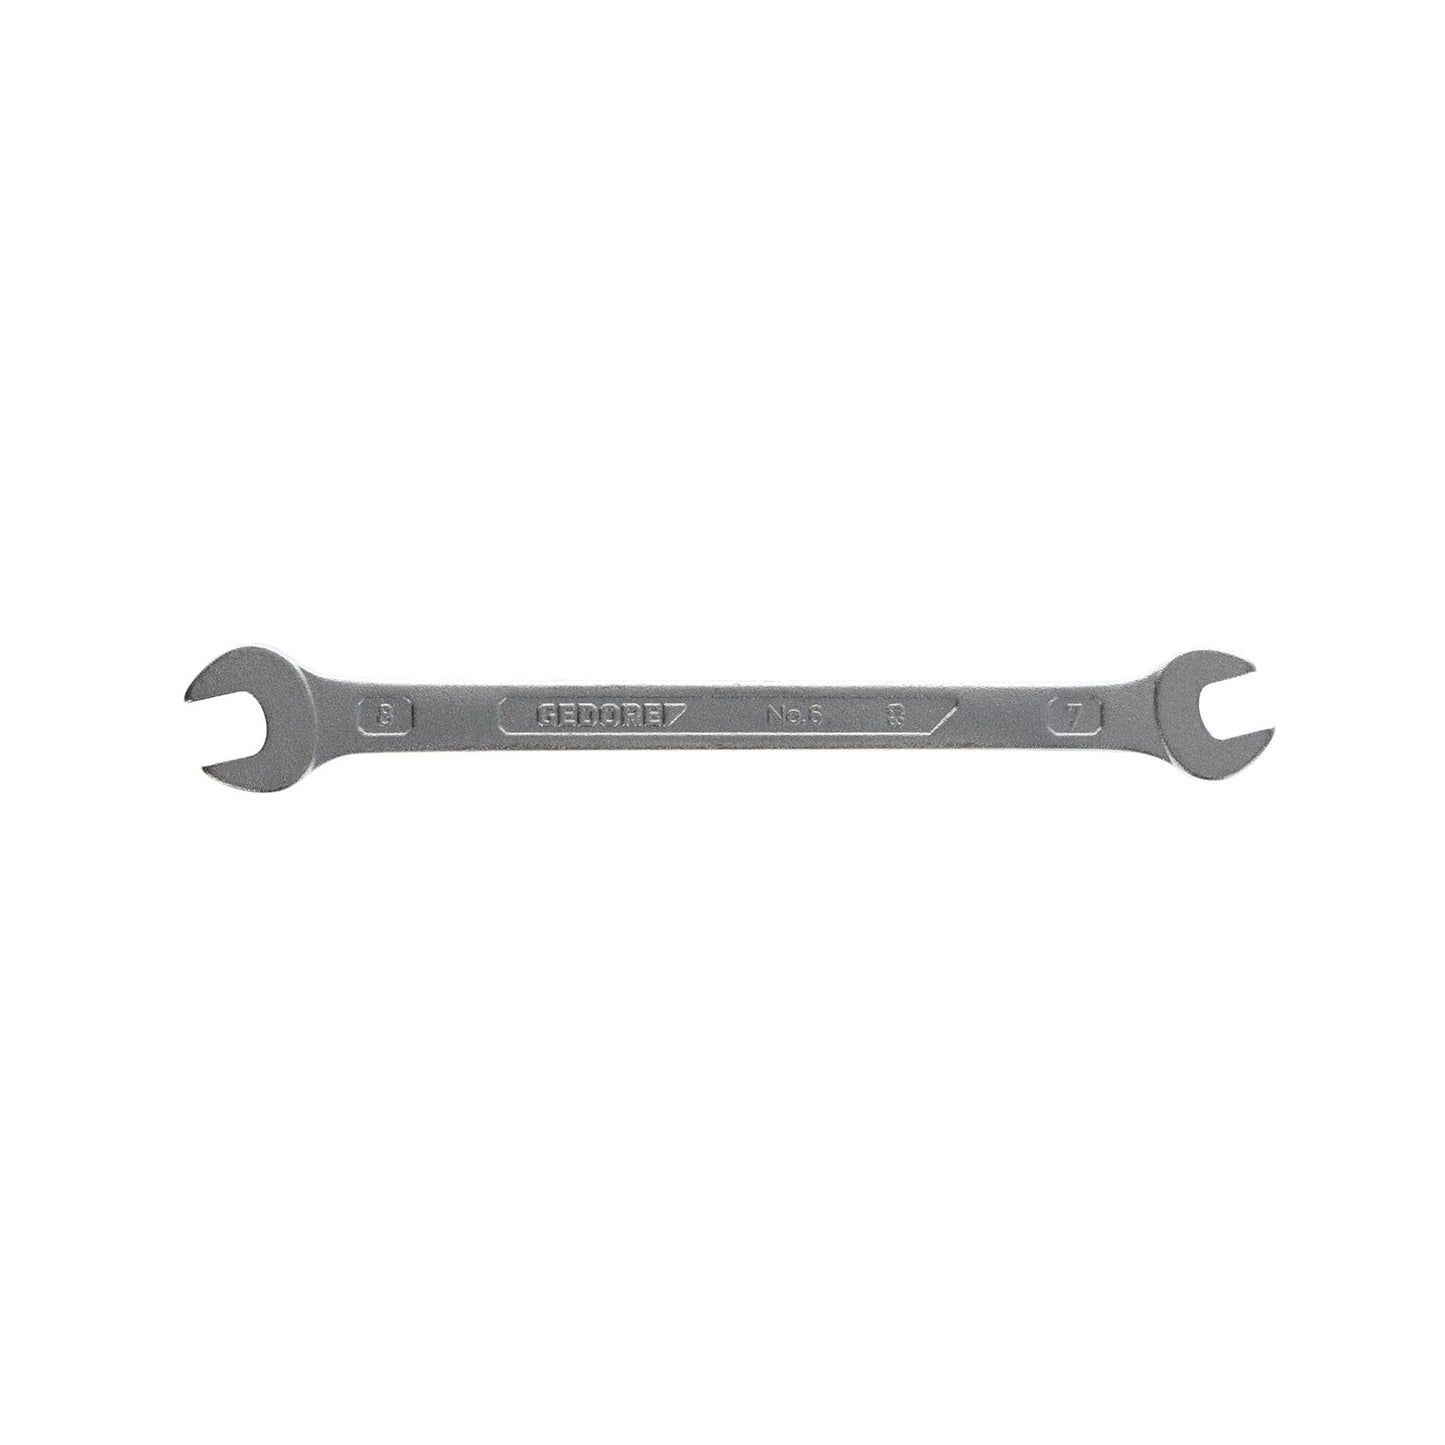 GEDORE 6 7X8 - 2-Mount Fixed Wrench, 7x8 (6064050)